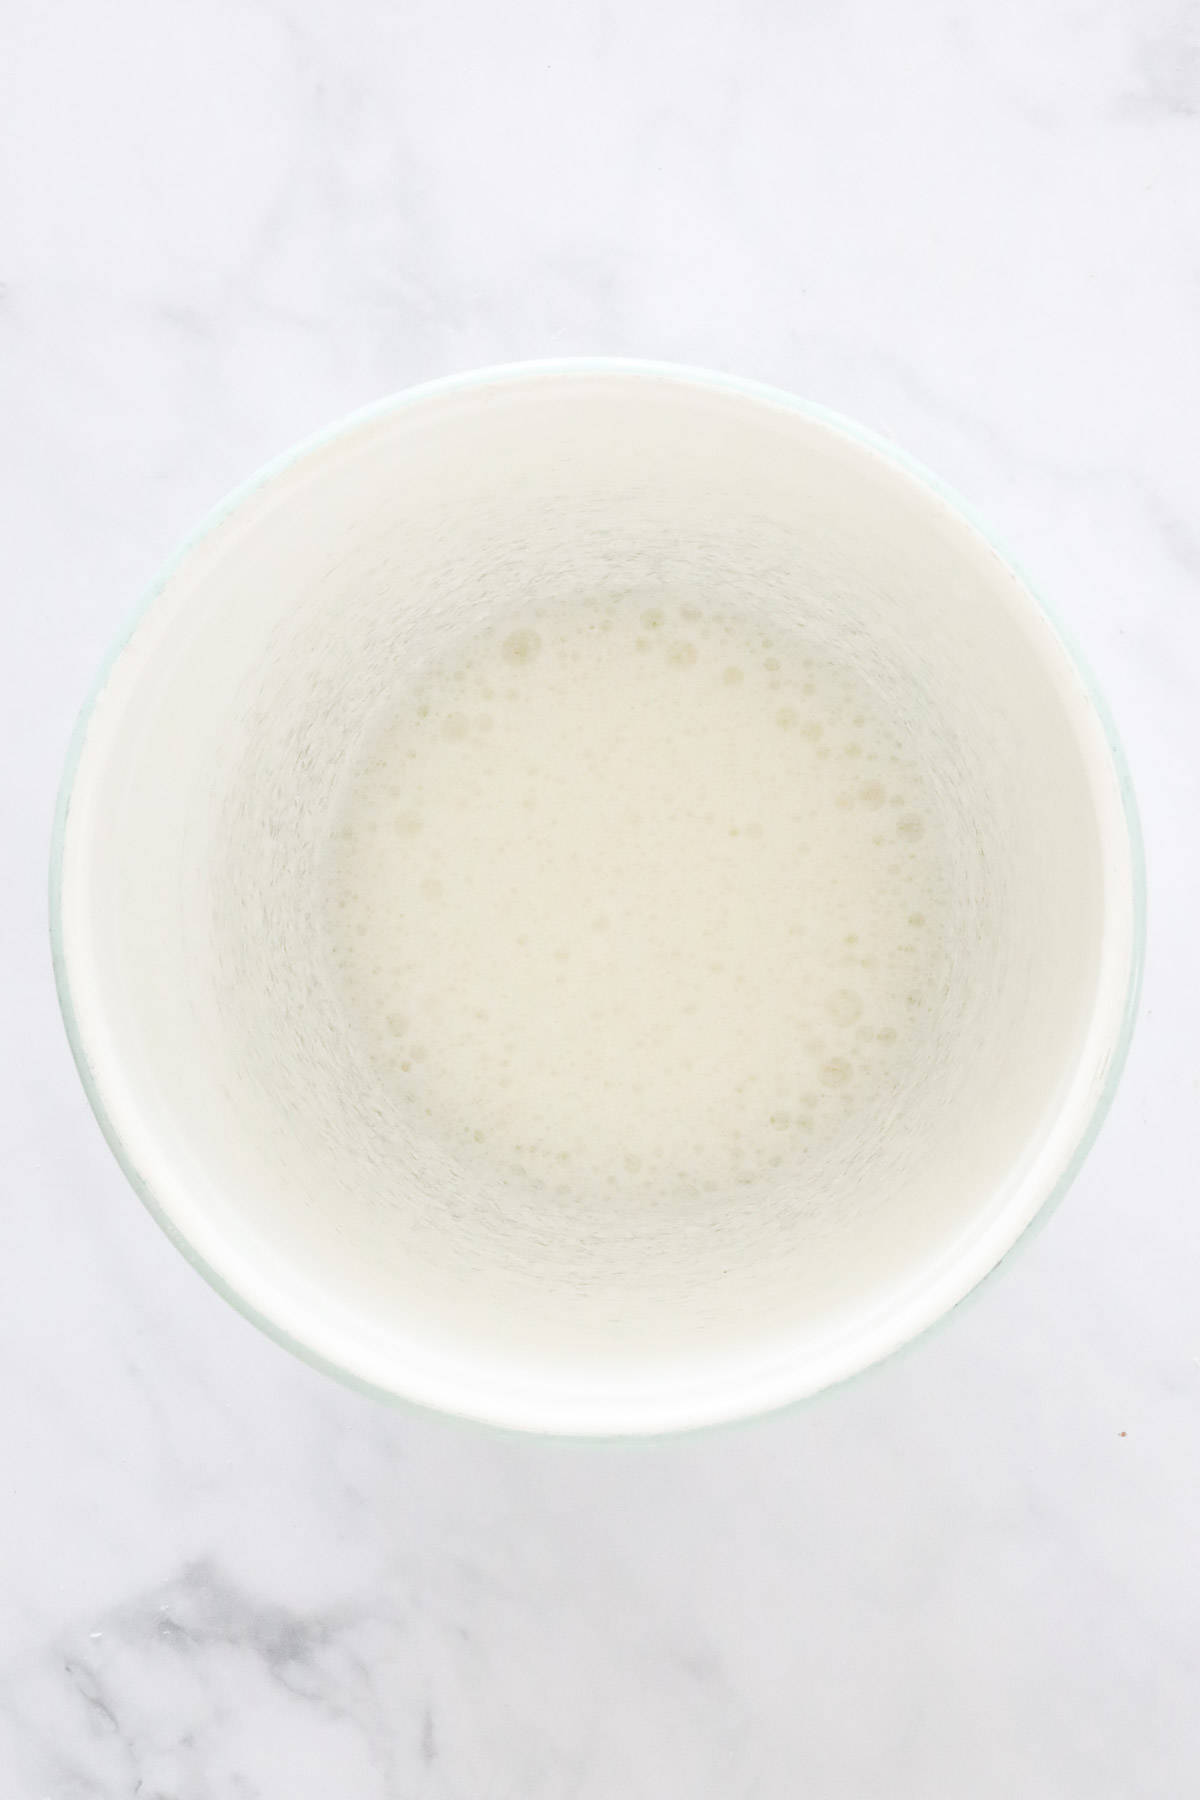 Egg whites that have been mixed until frothy in a bowl.